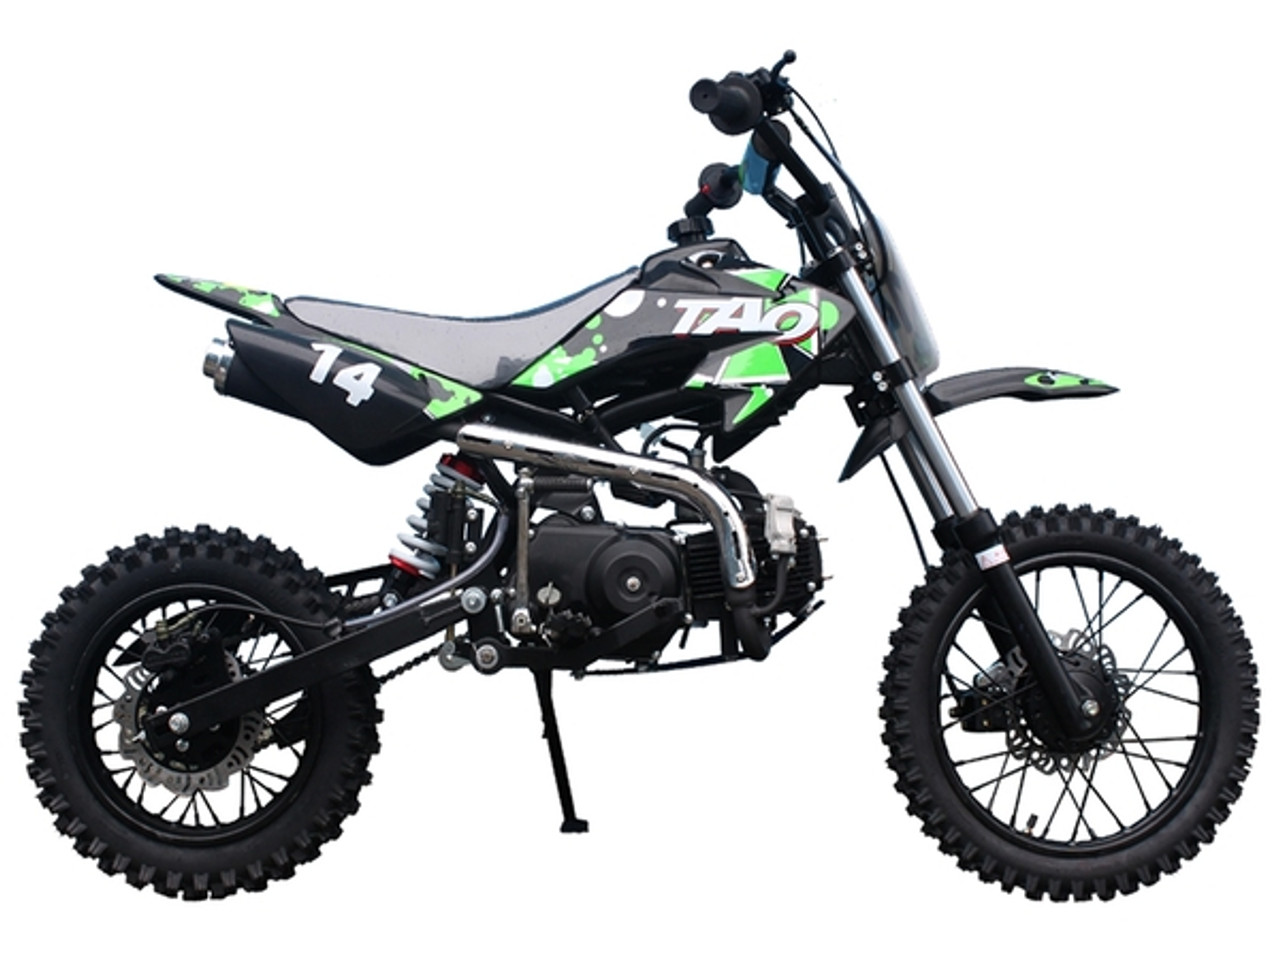 Buy TaoTao DB-14 Dirt Bike, Available in Assembled, for Online sale.